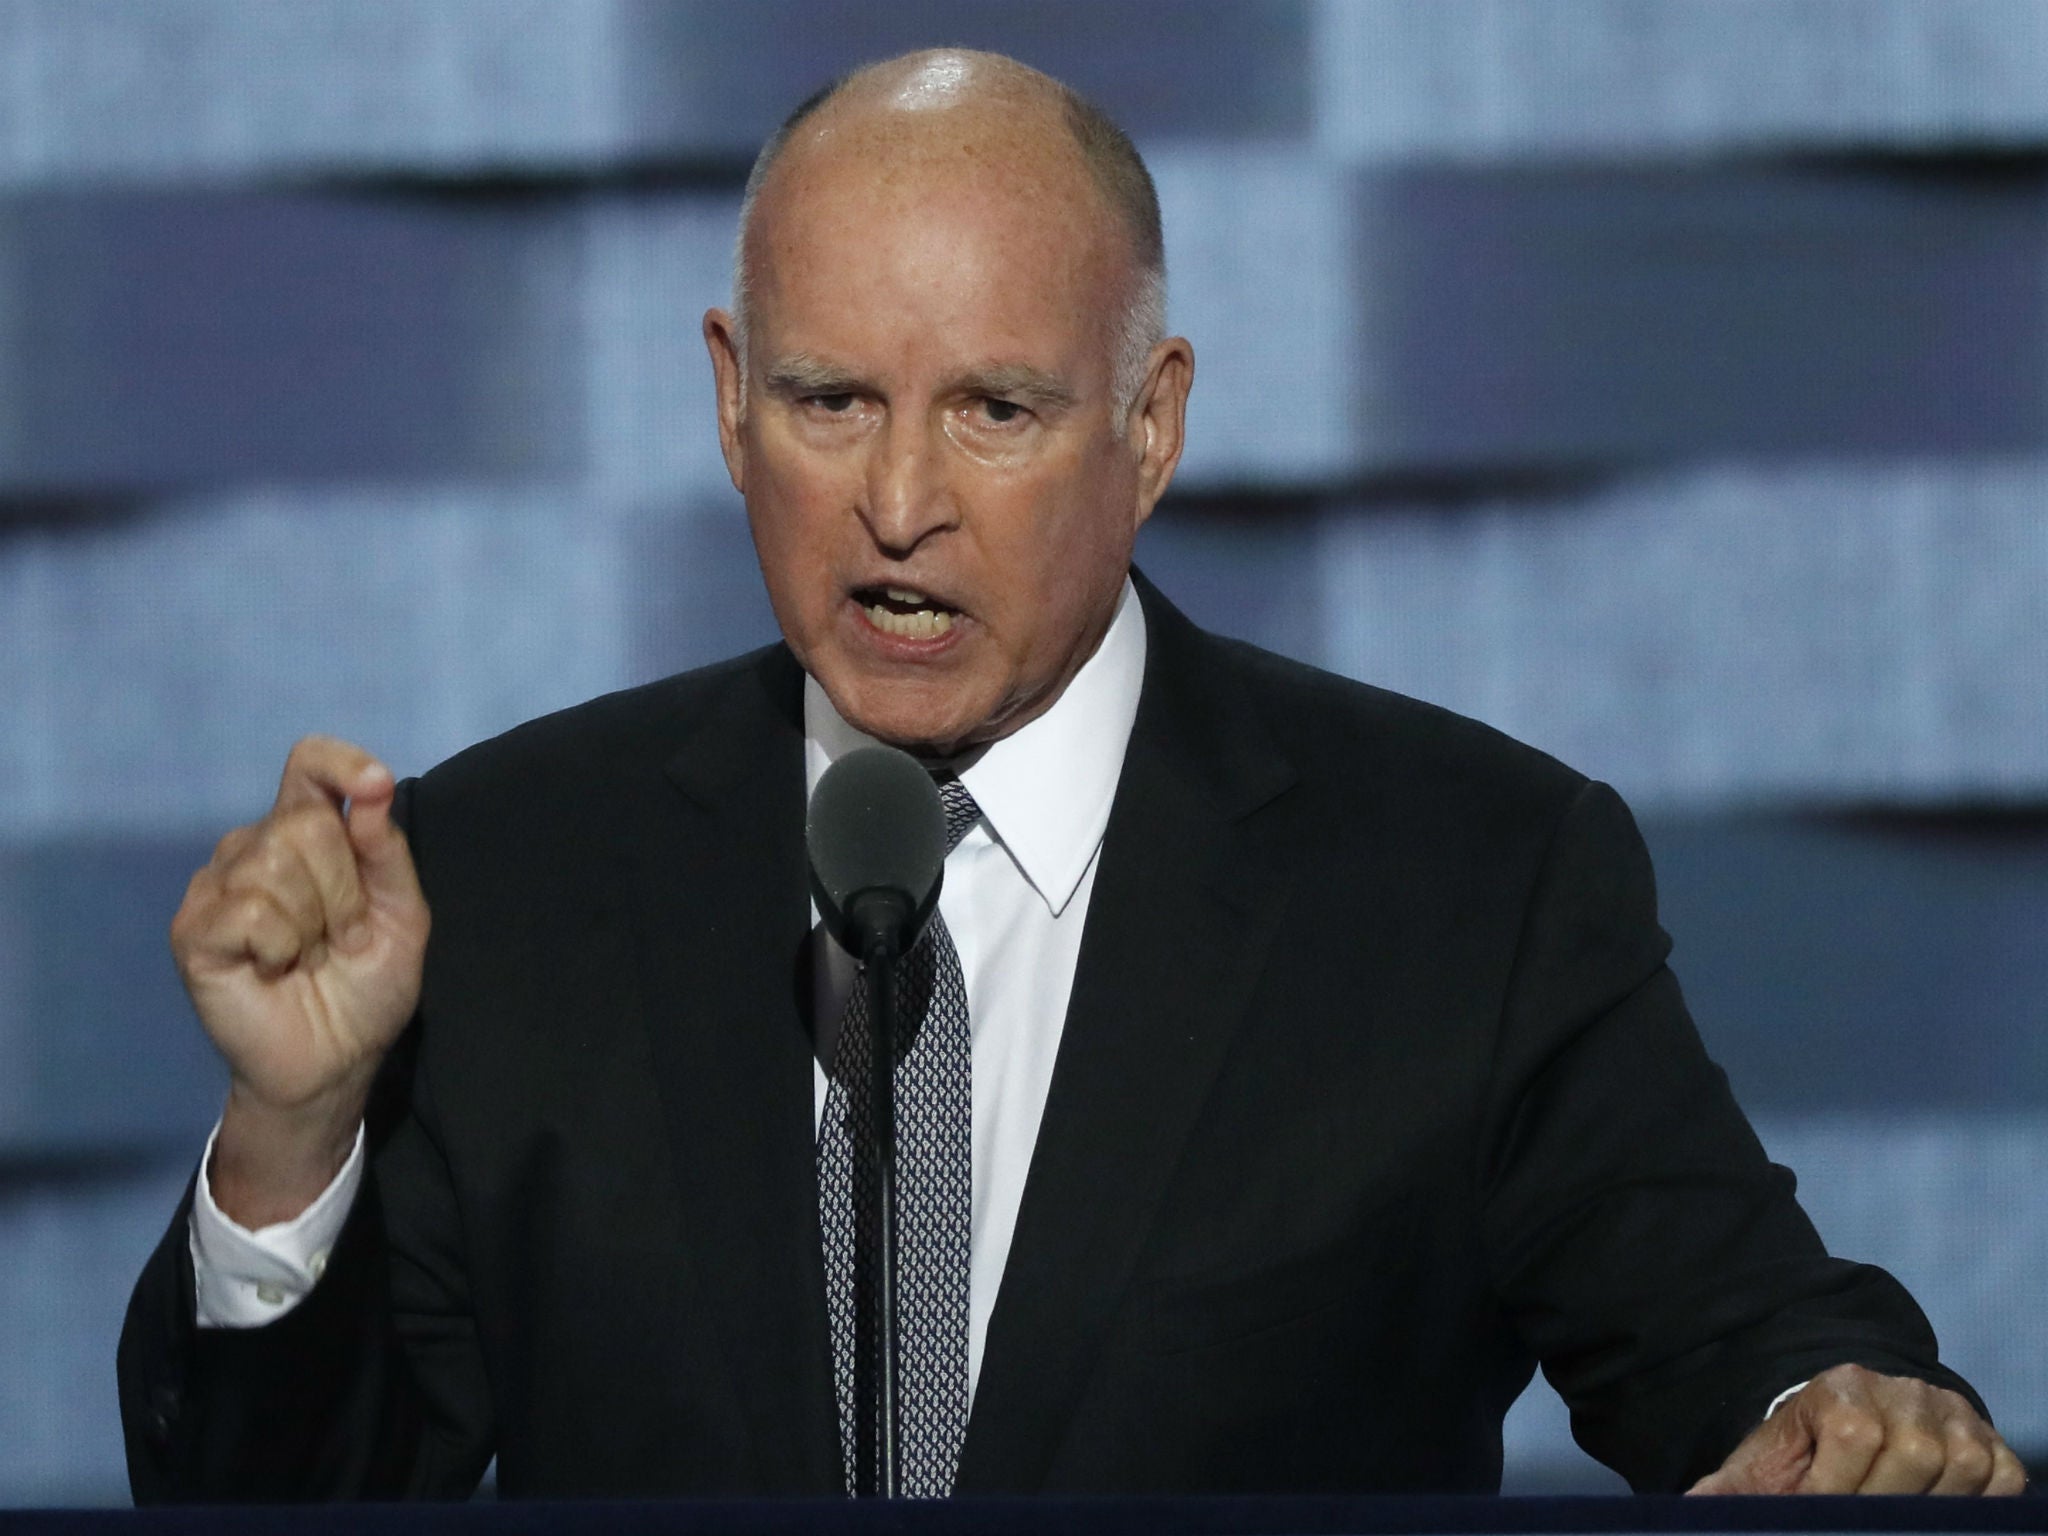 California Governor Jerry Brown has not minced words in his criticism of the Trump administration